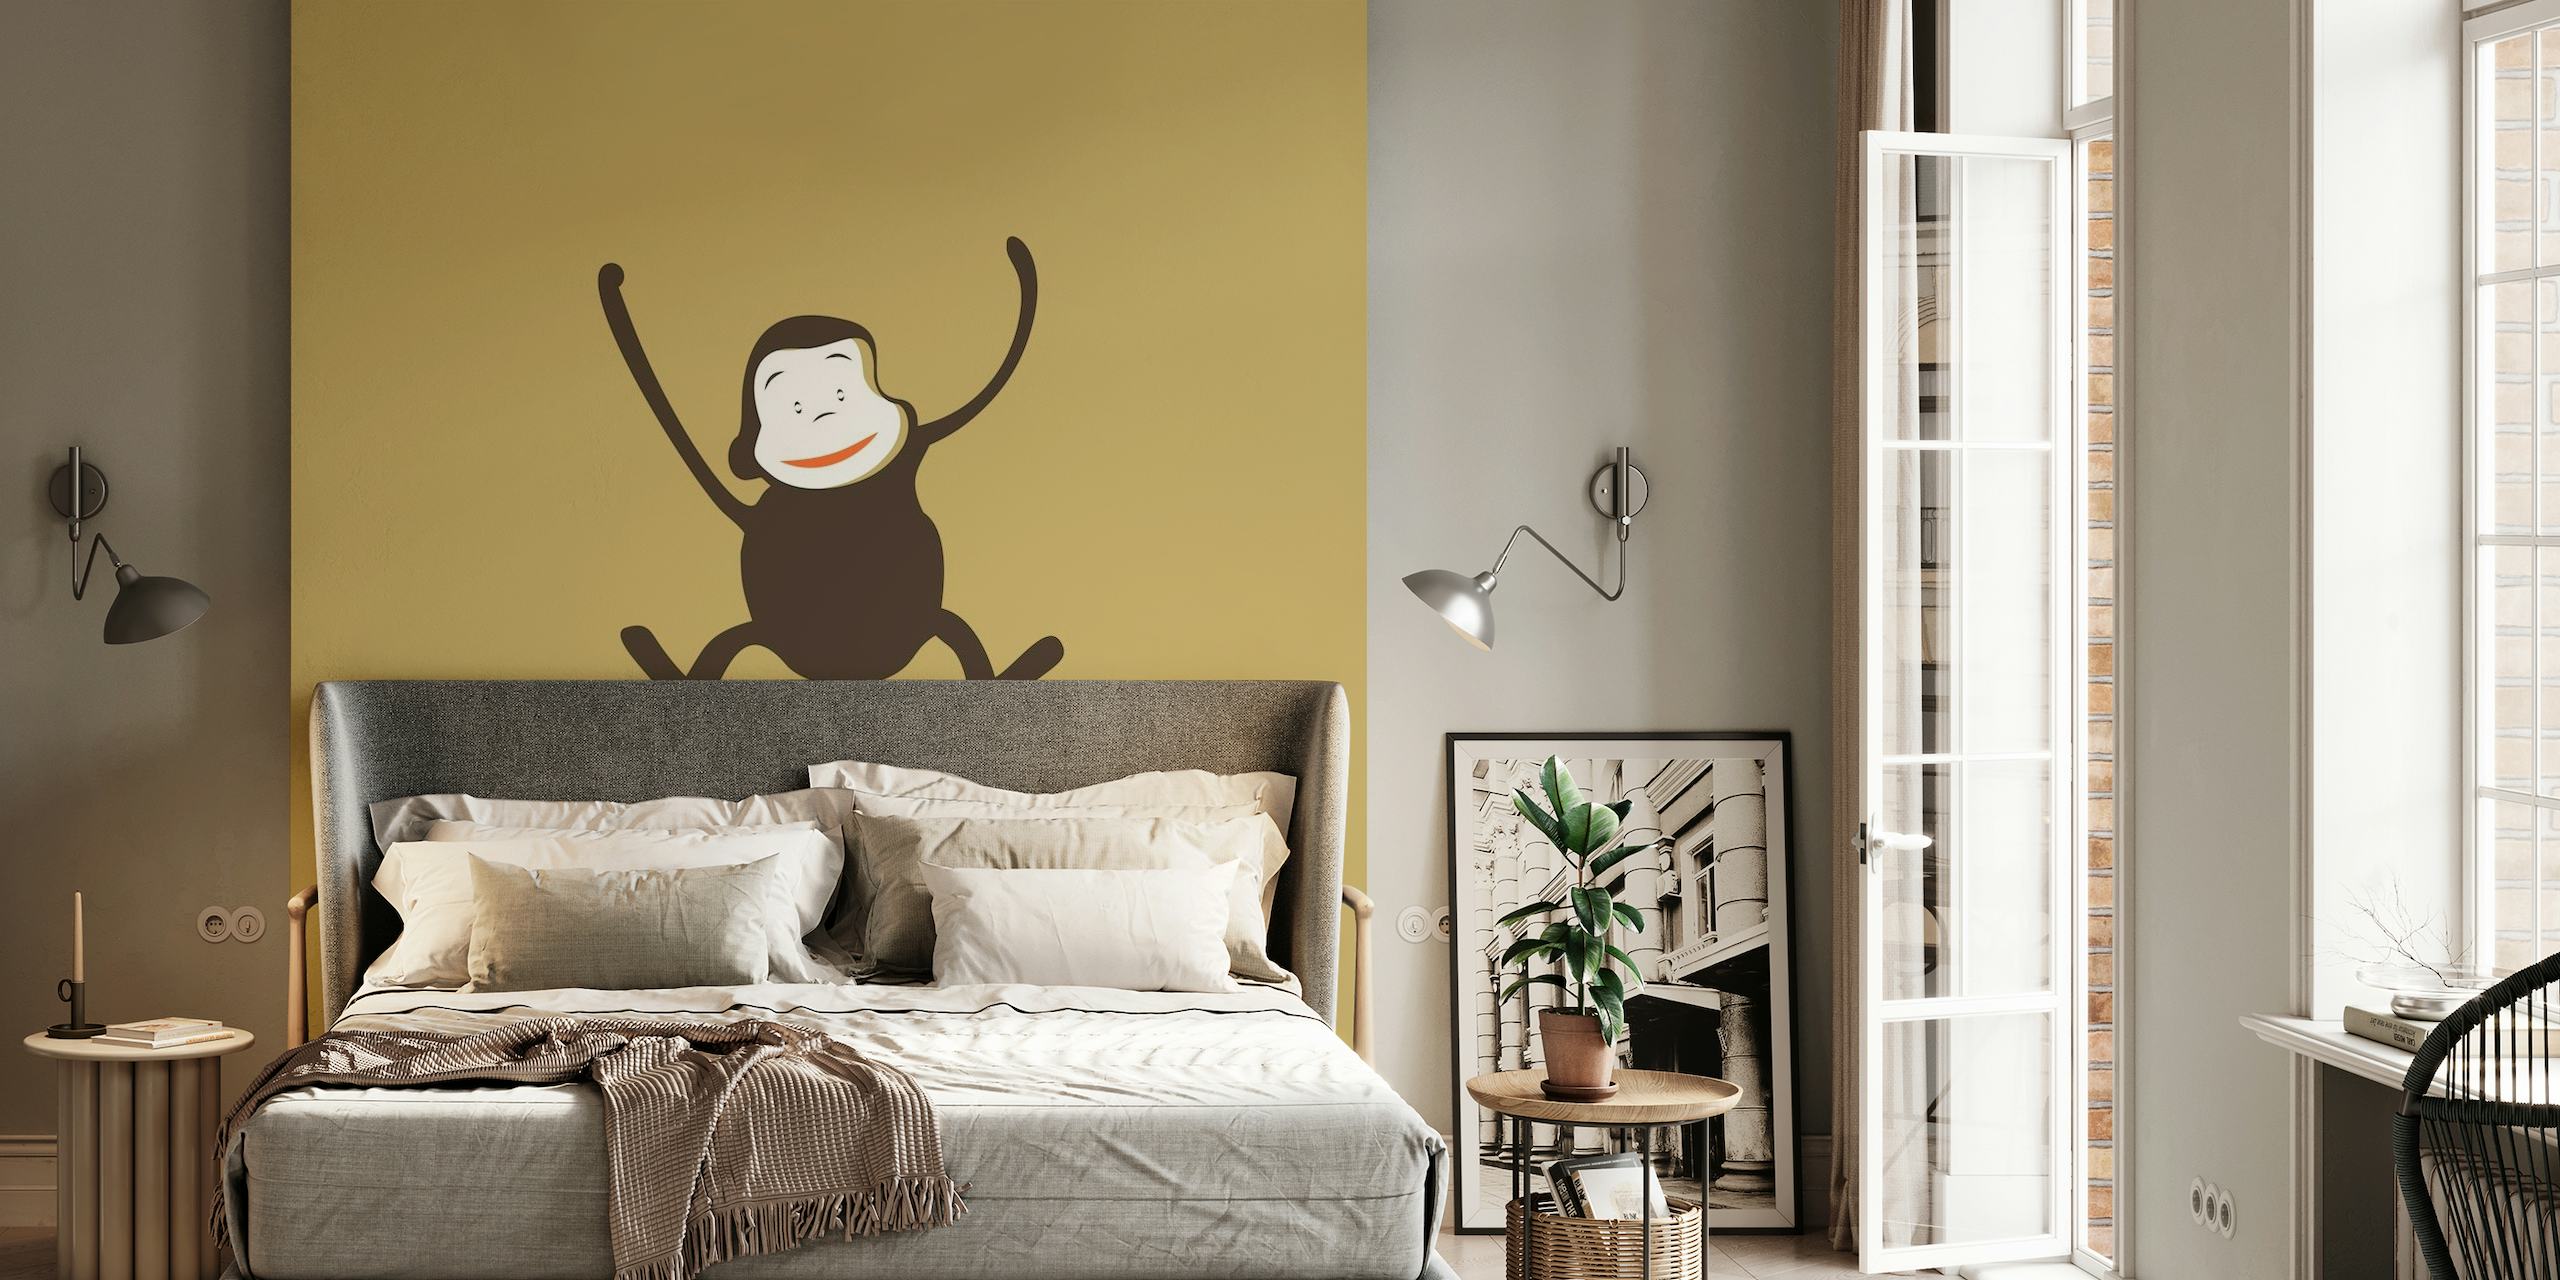 Illustration of a playful monkey on a mocha brown wall mural background